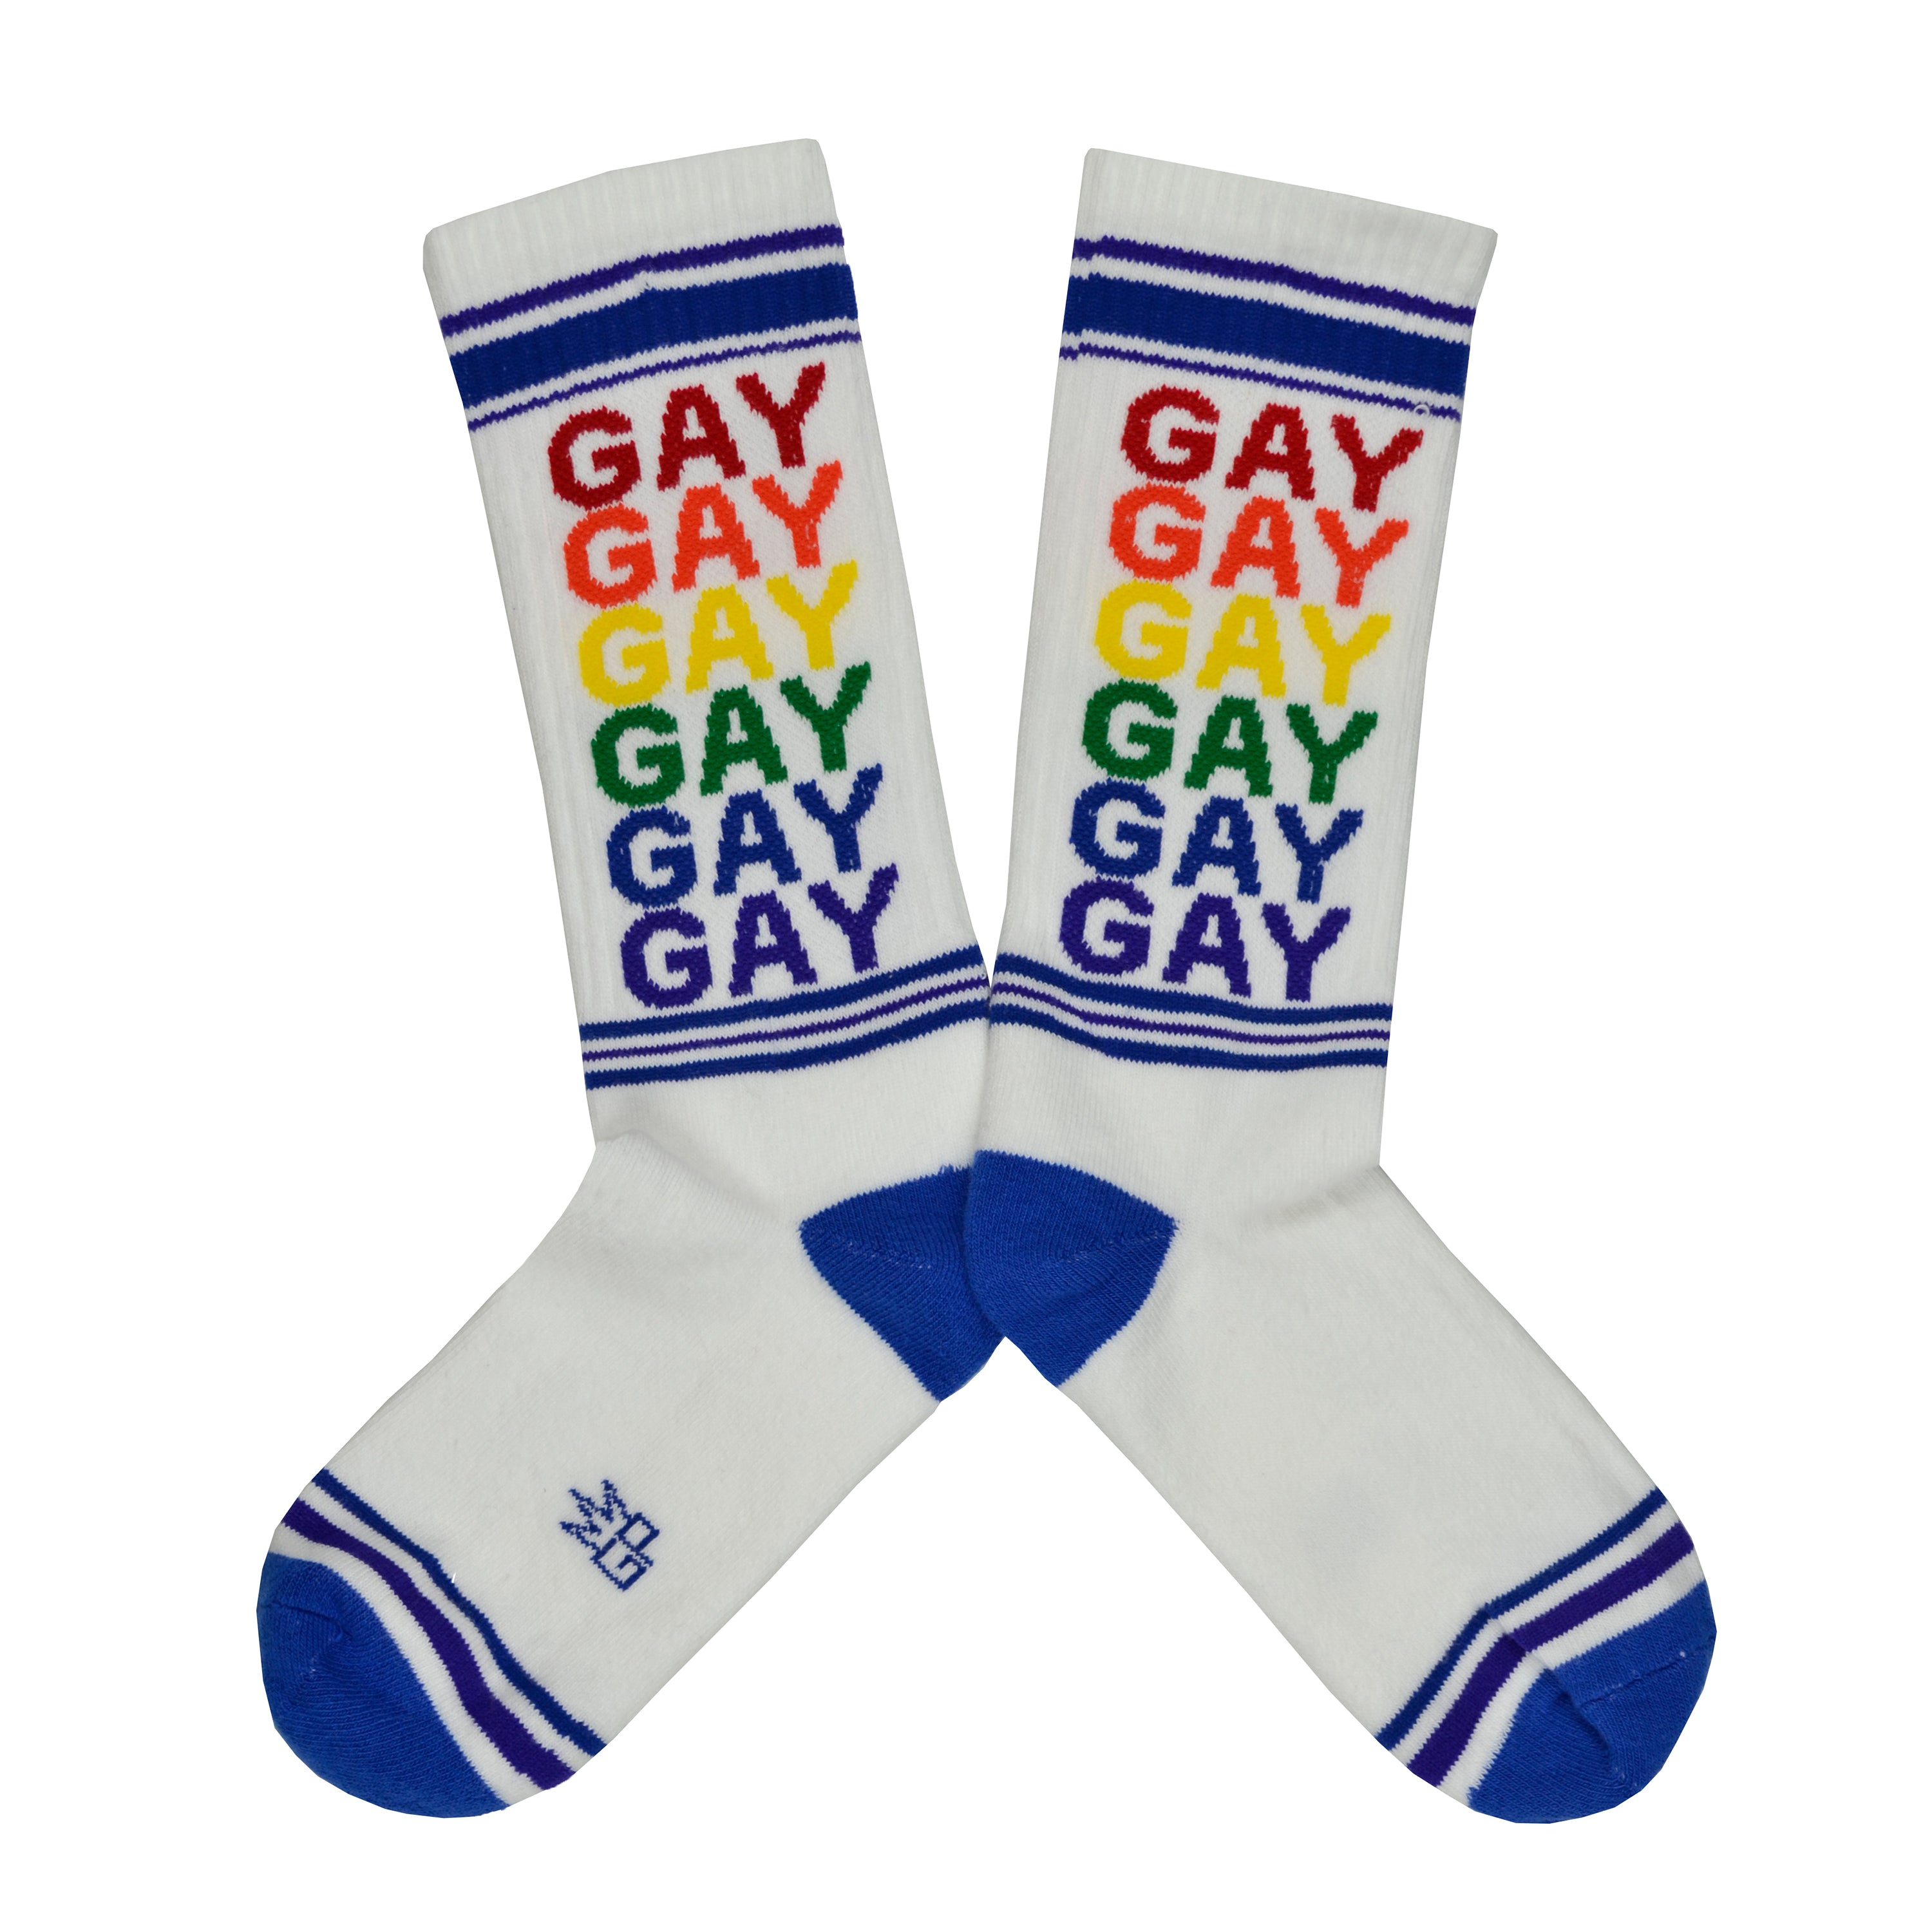 These white cotton unisex crew socks with a blue striped toe and cuff by the brand Gumball Poodle feature the word 